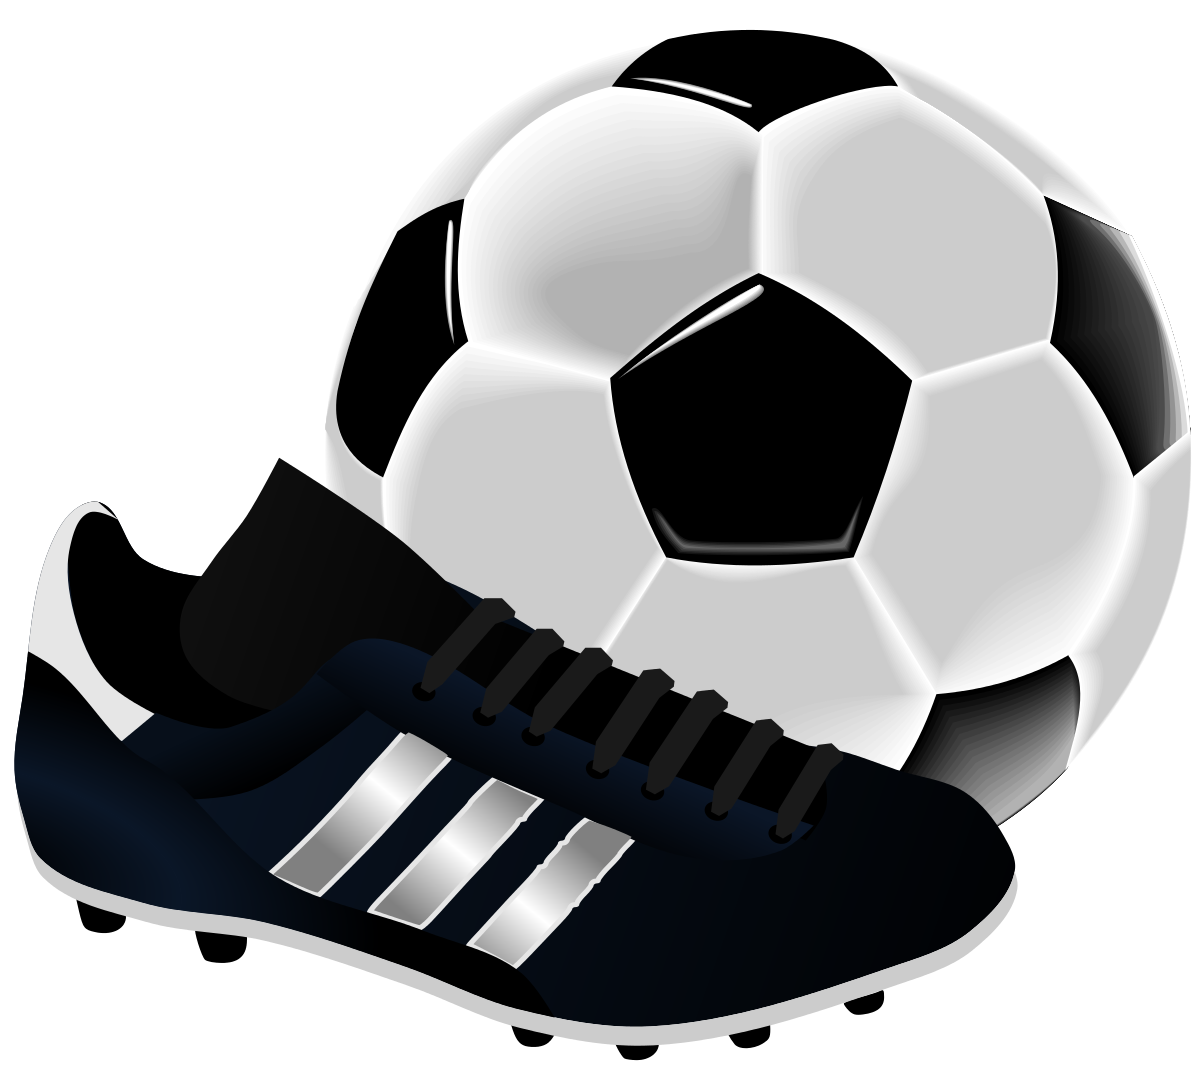 Soccer Clipart by gnokii : Sport Cliparts #19361- ClipartSE